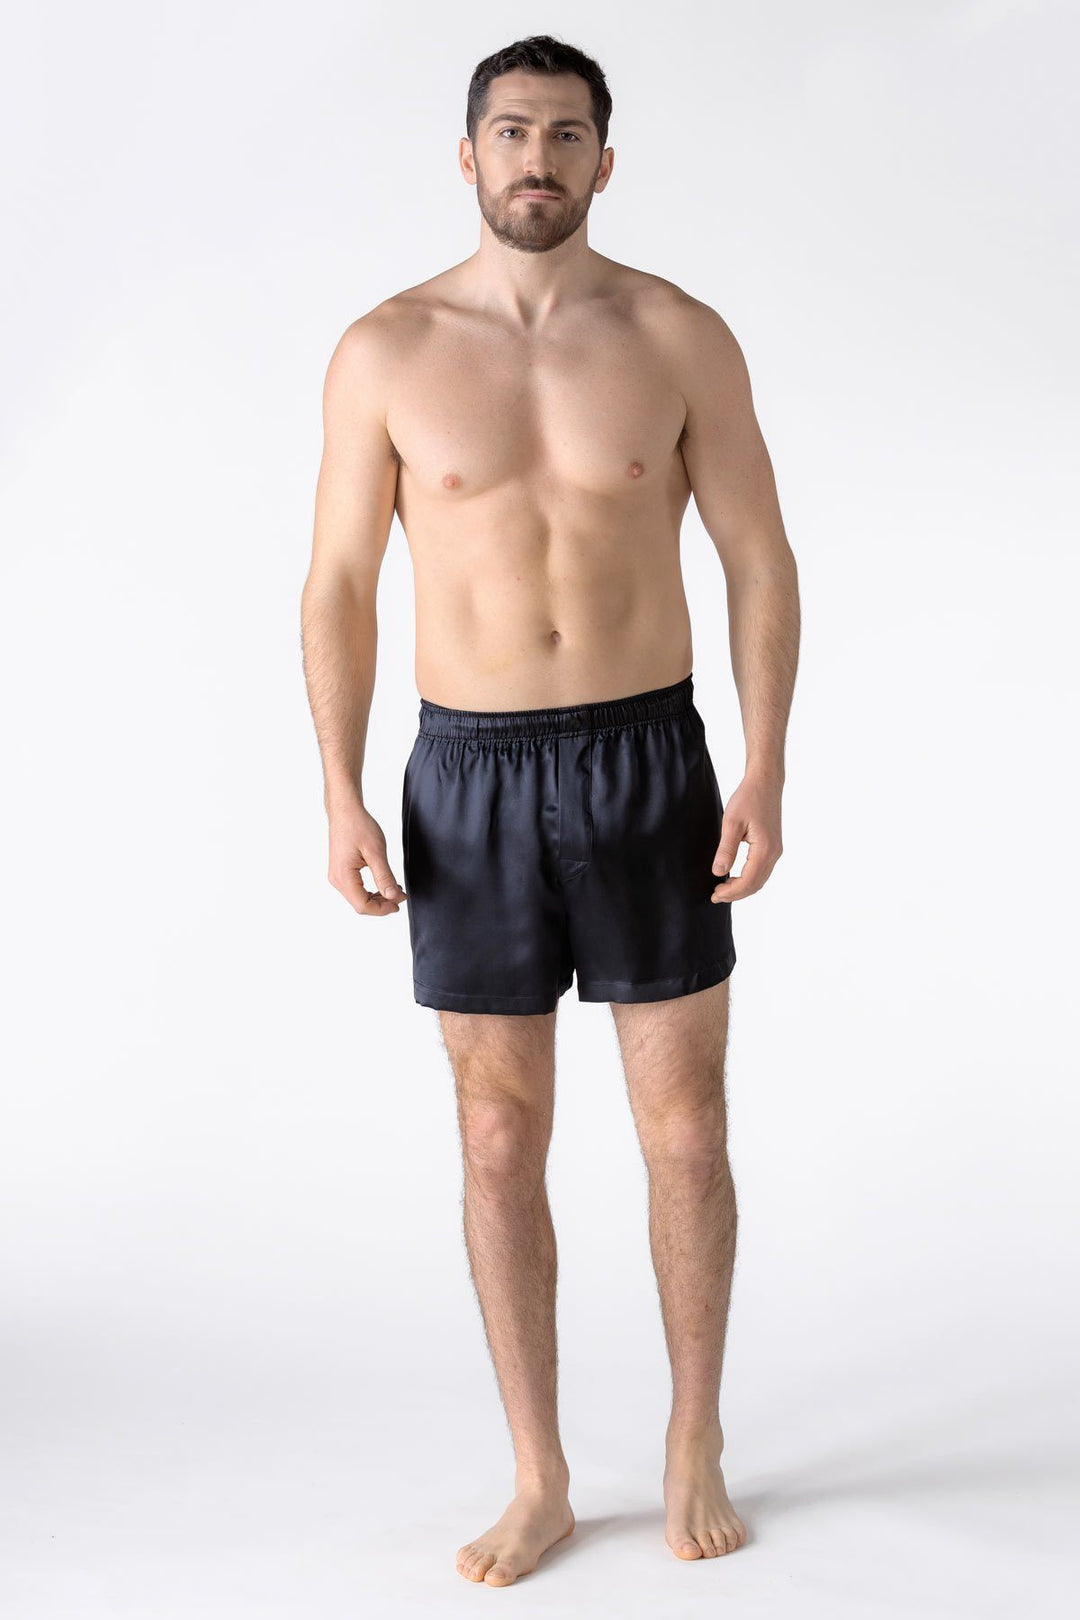 100% SILK BOXERS - Expect Lace